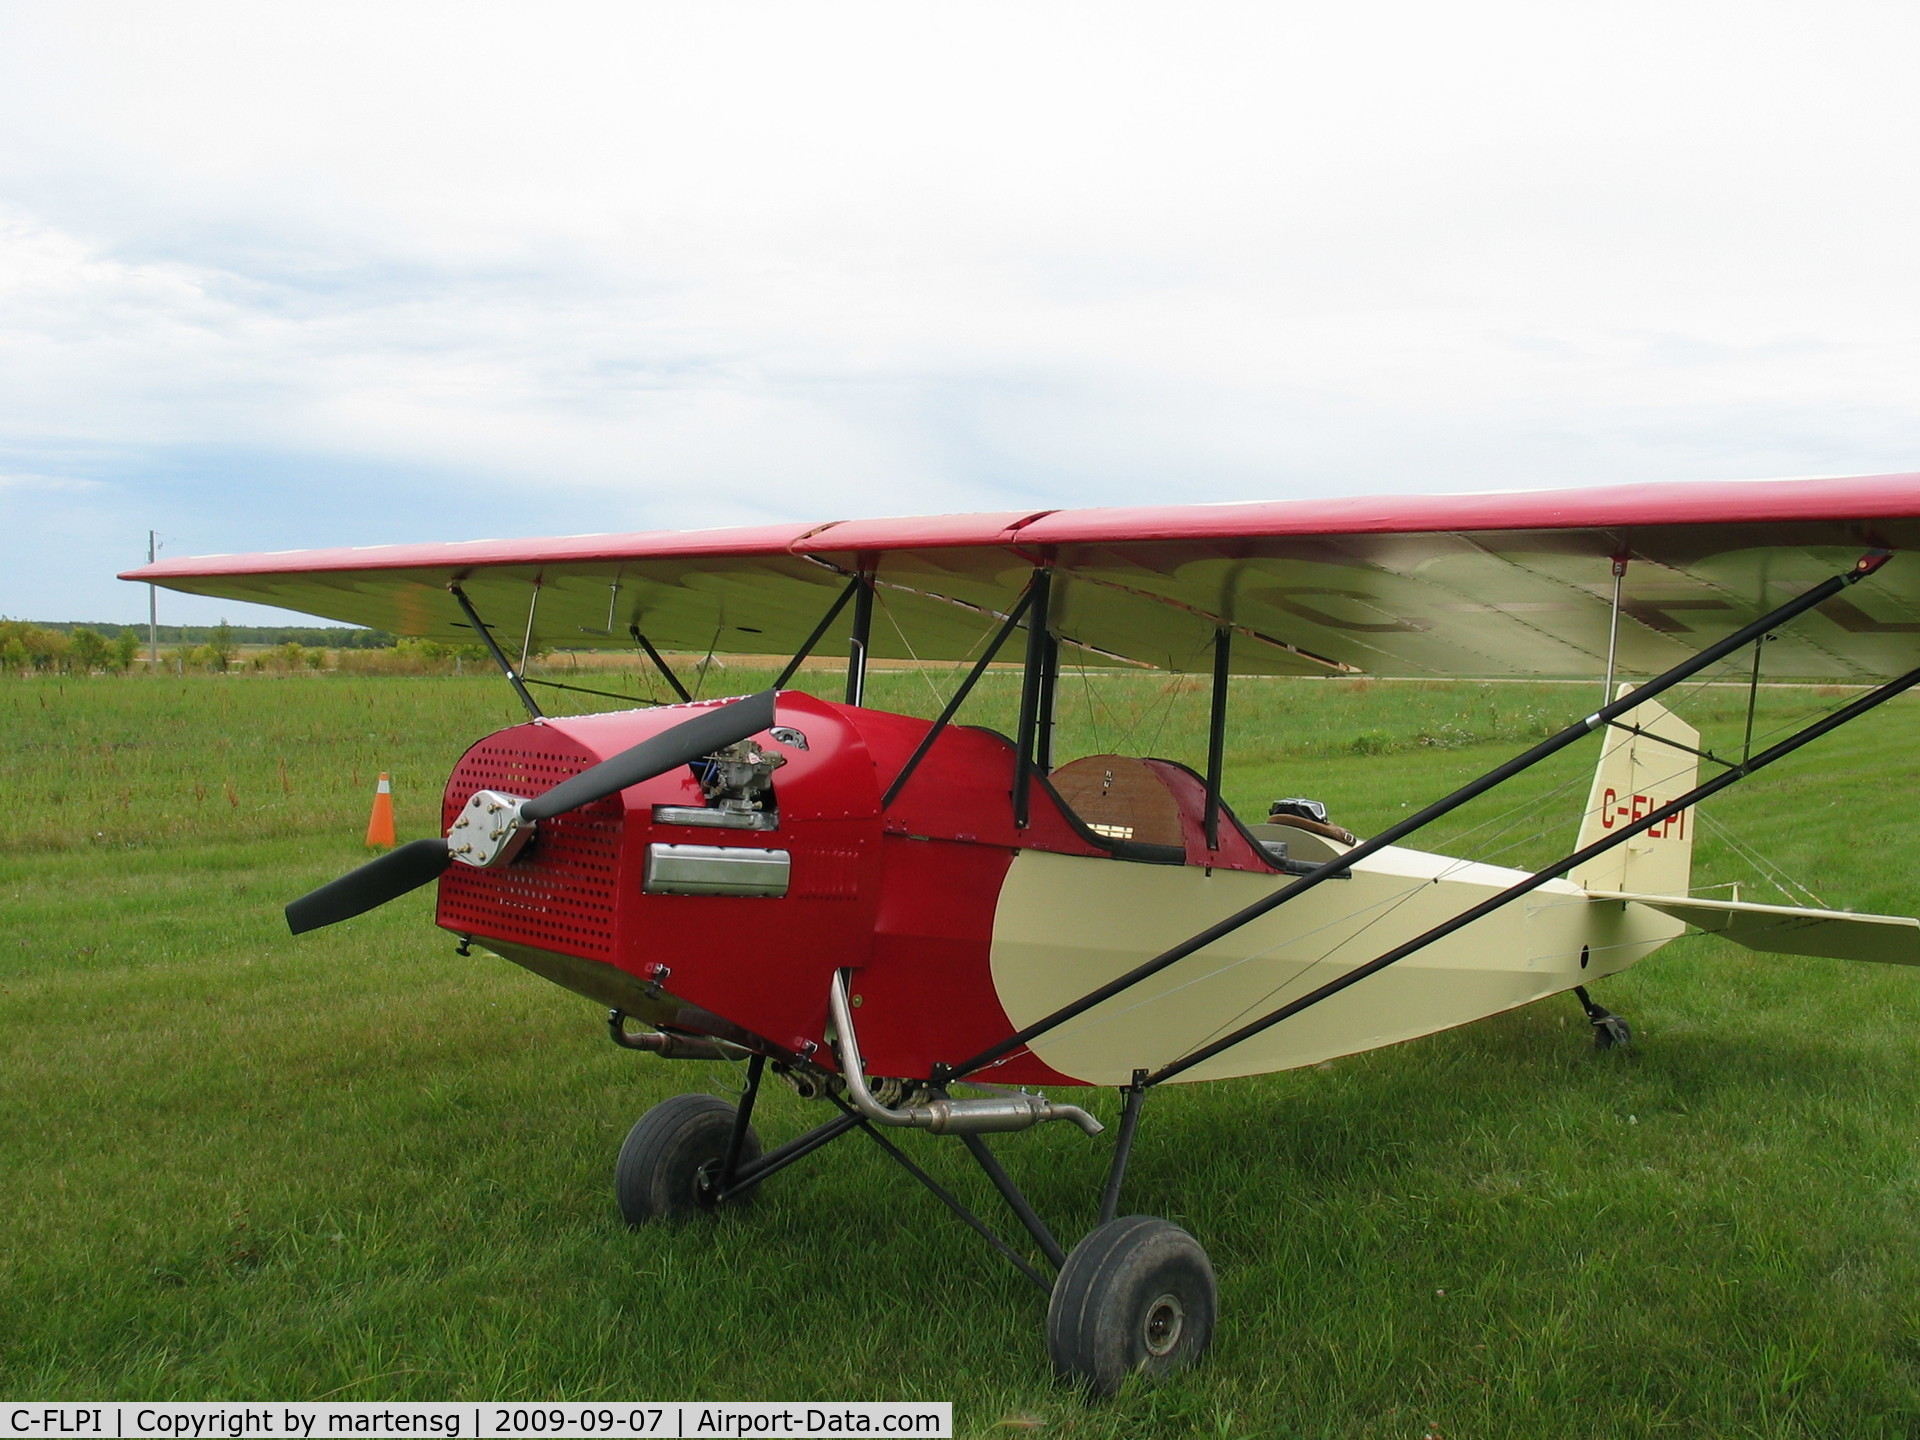 C-FLPI, , 1966 Corvair engine, 164 cubic inches, sitka spruce frame, polyfibre covering